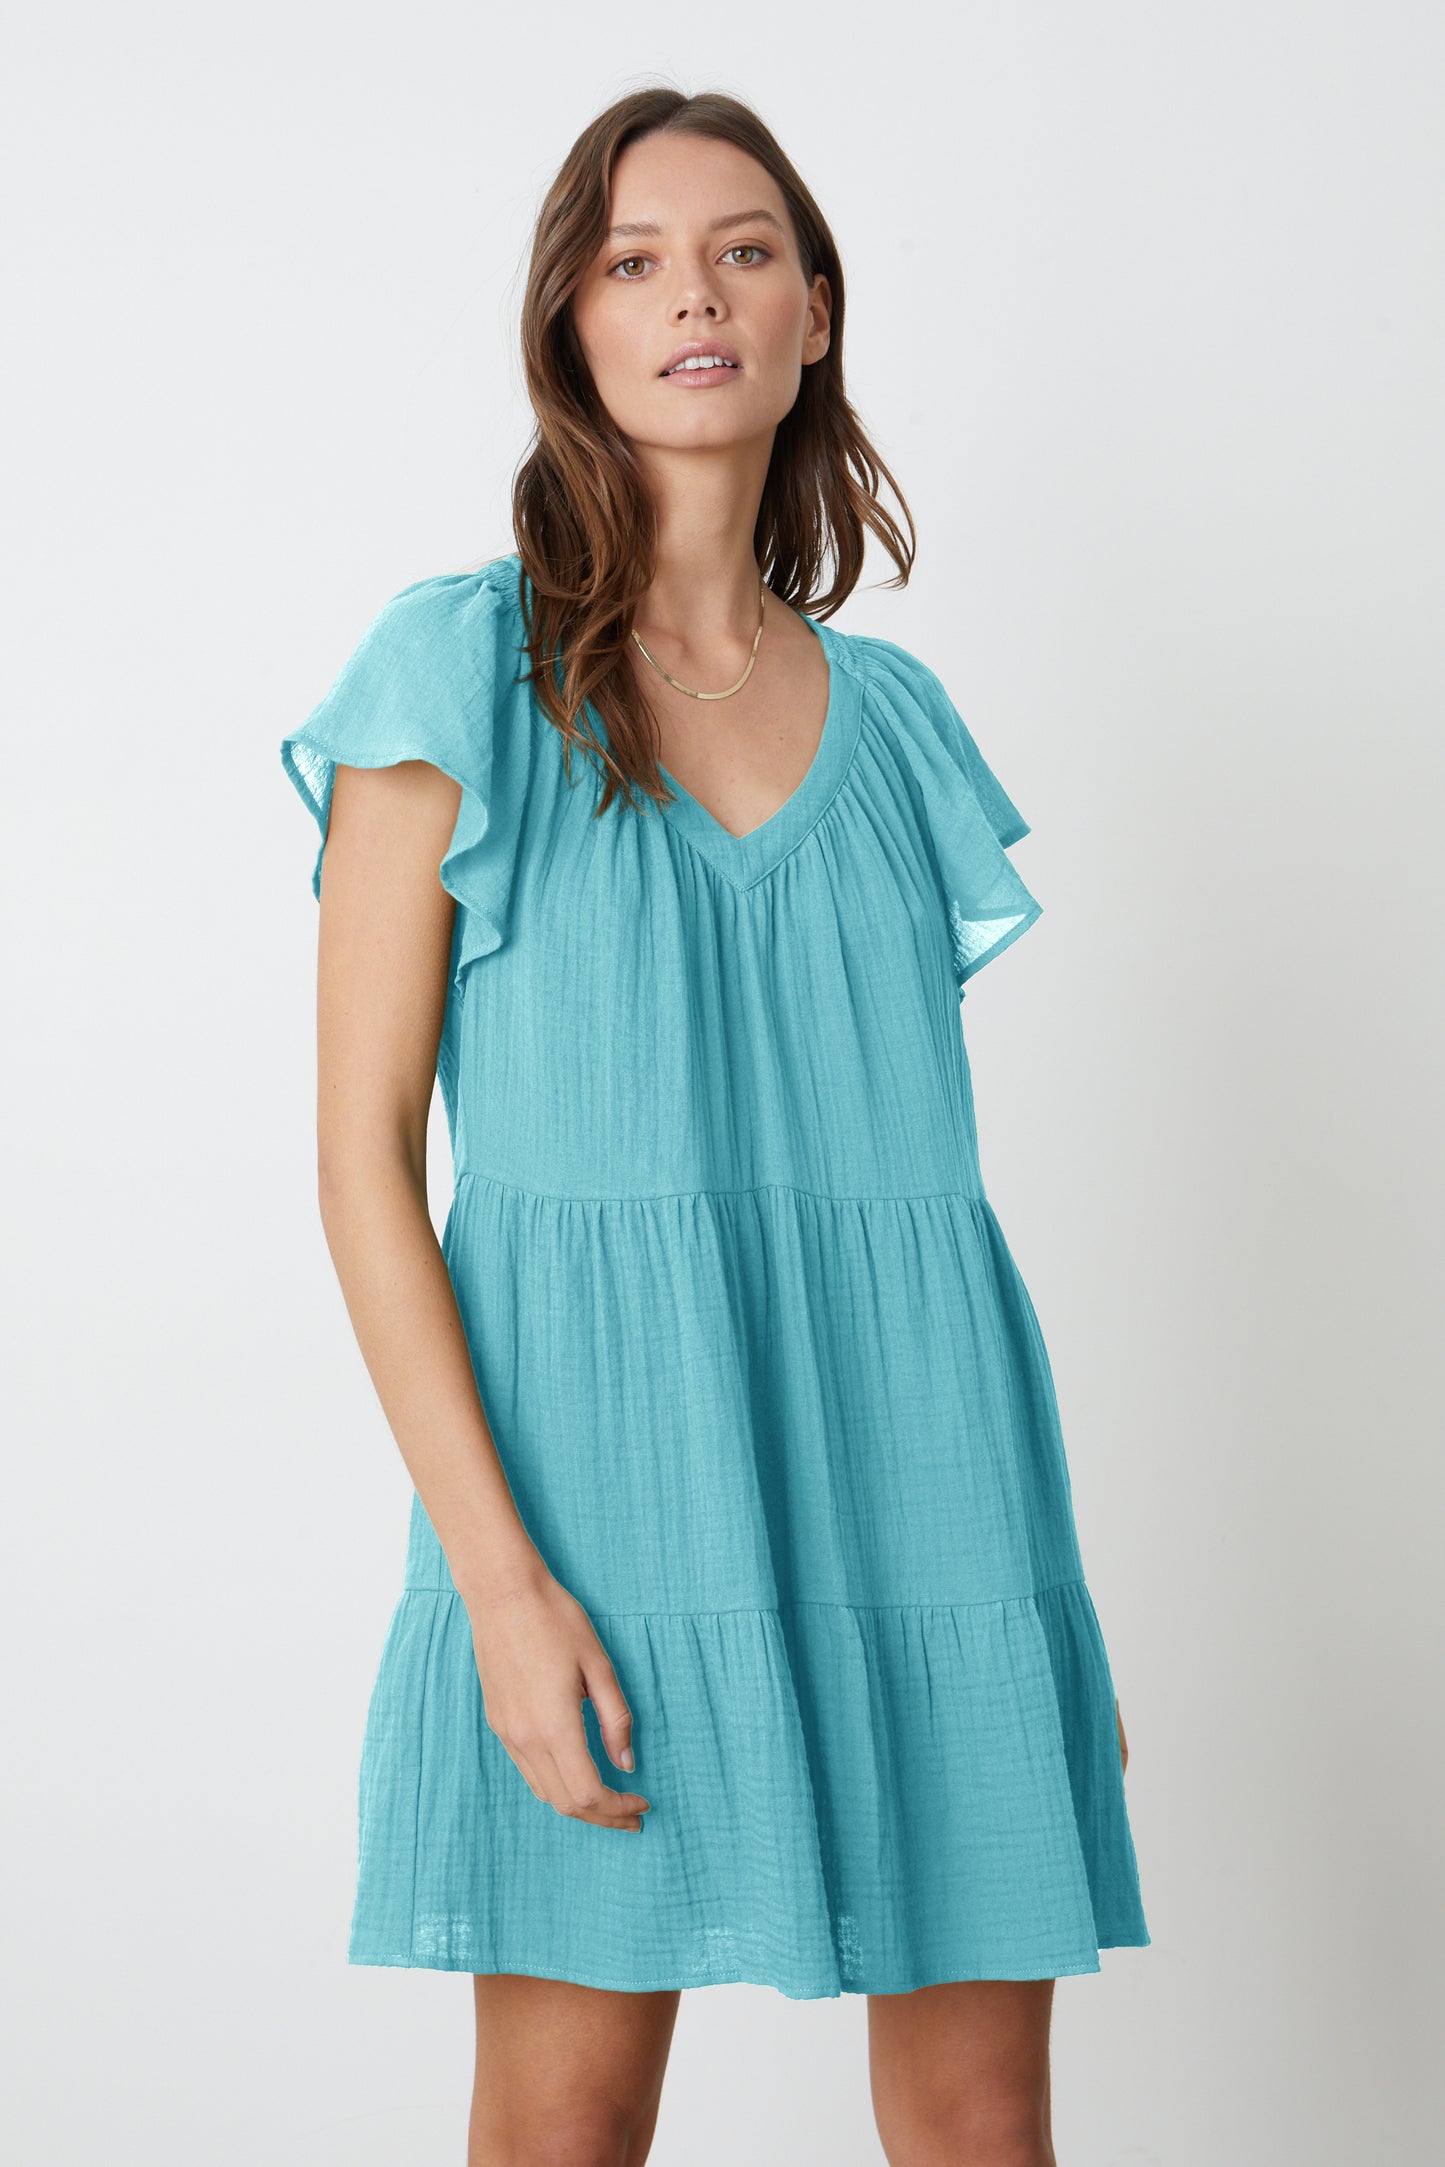 A woman wearing the Velvet by Graham & Spencer Eleanor Cotton Gauze Tiered Dress in aqua blue with ruffled hem.-26577372348609